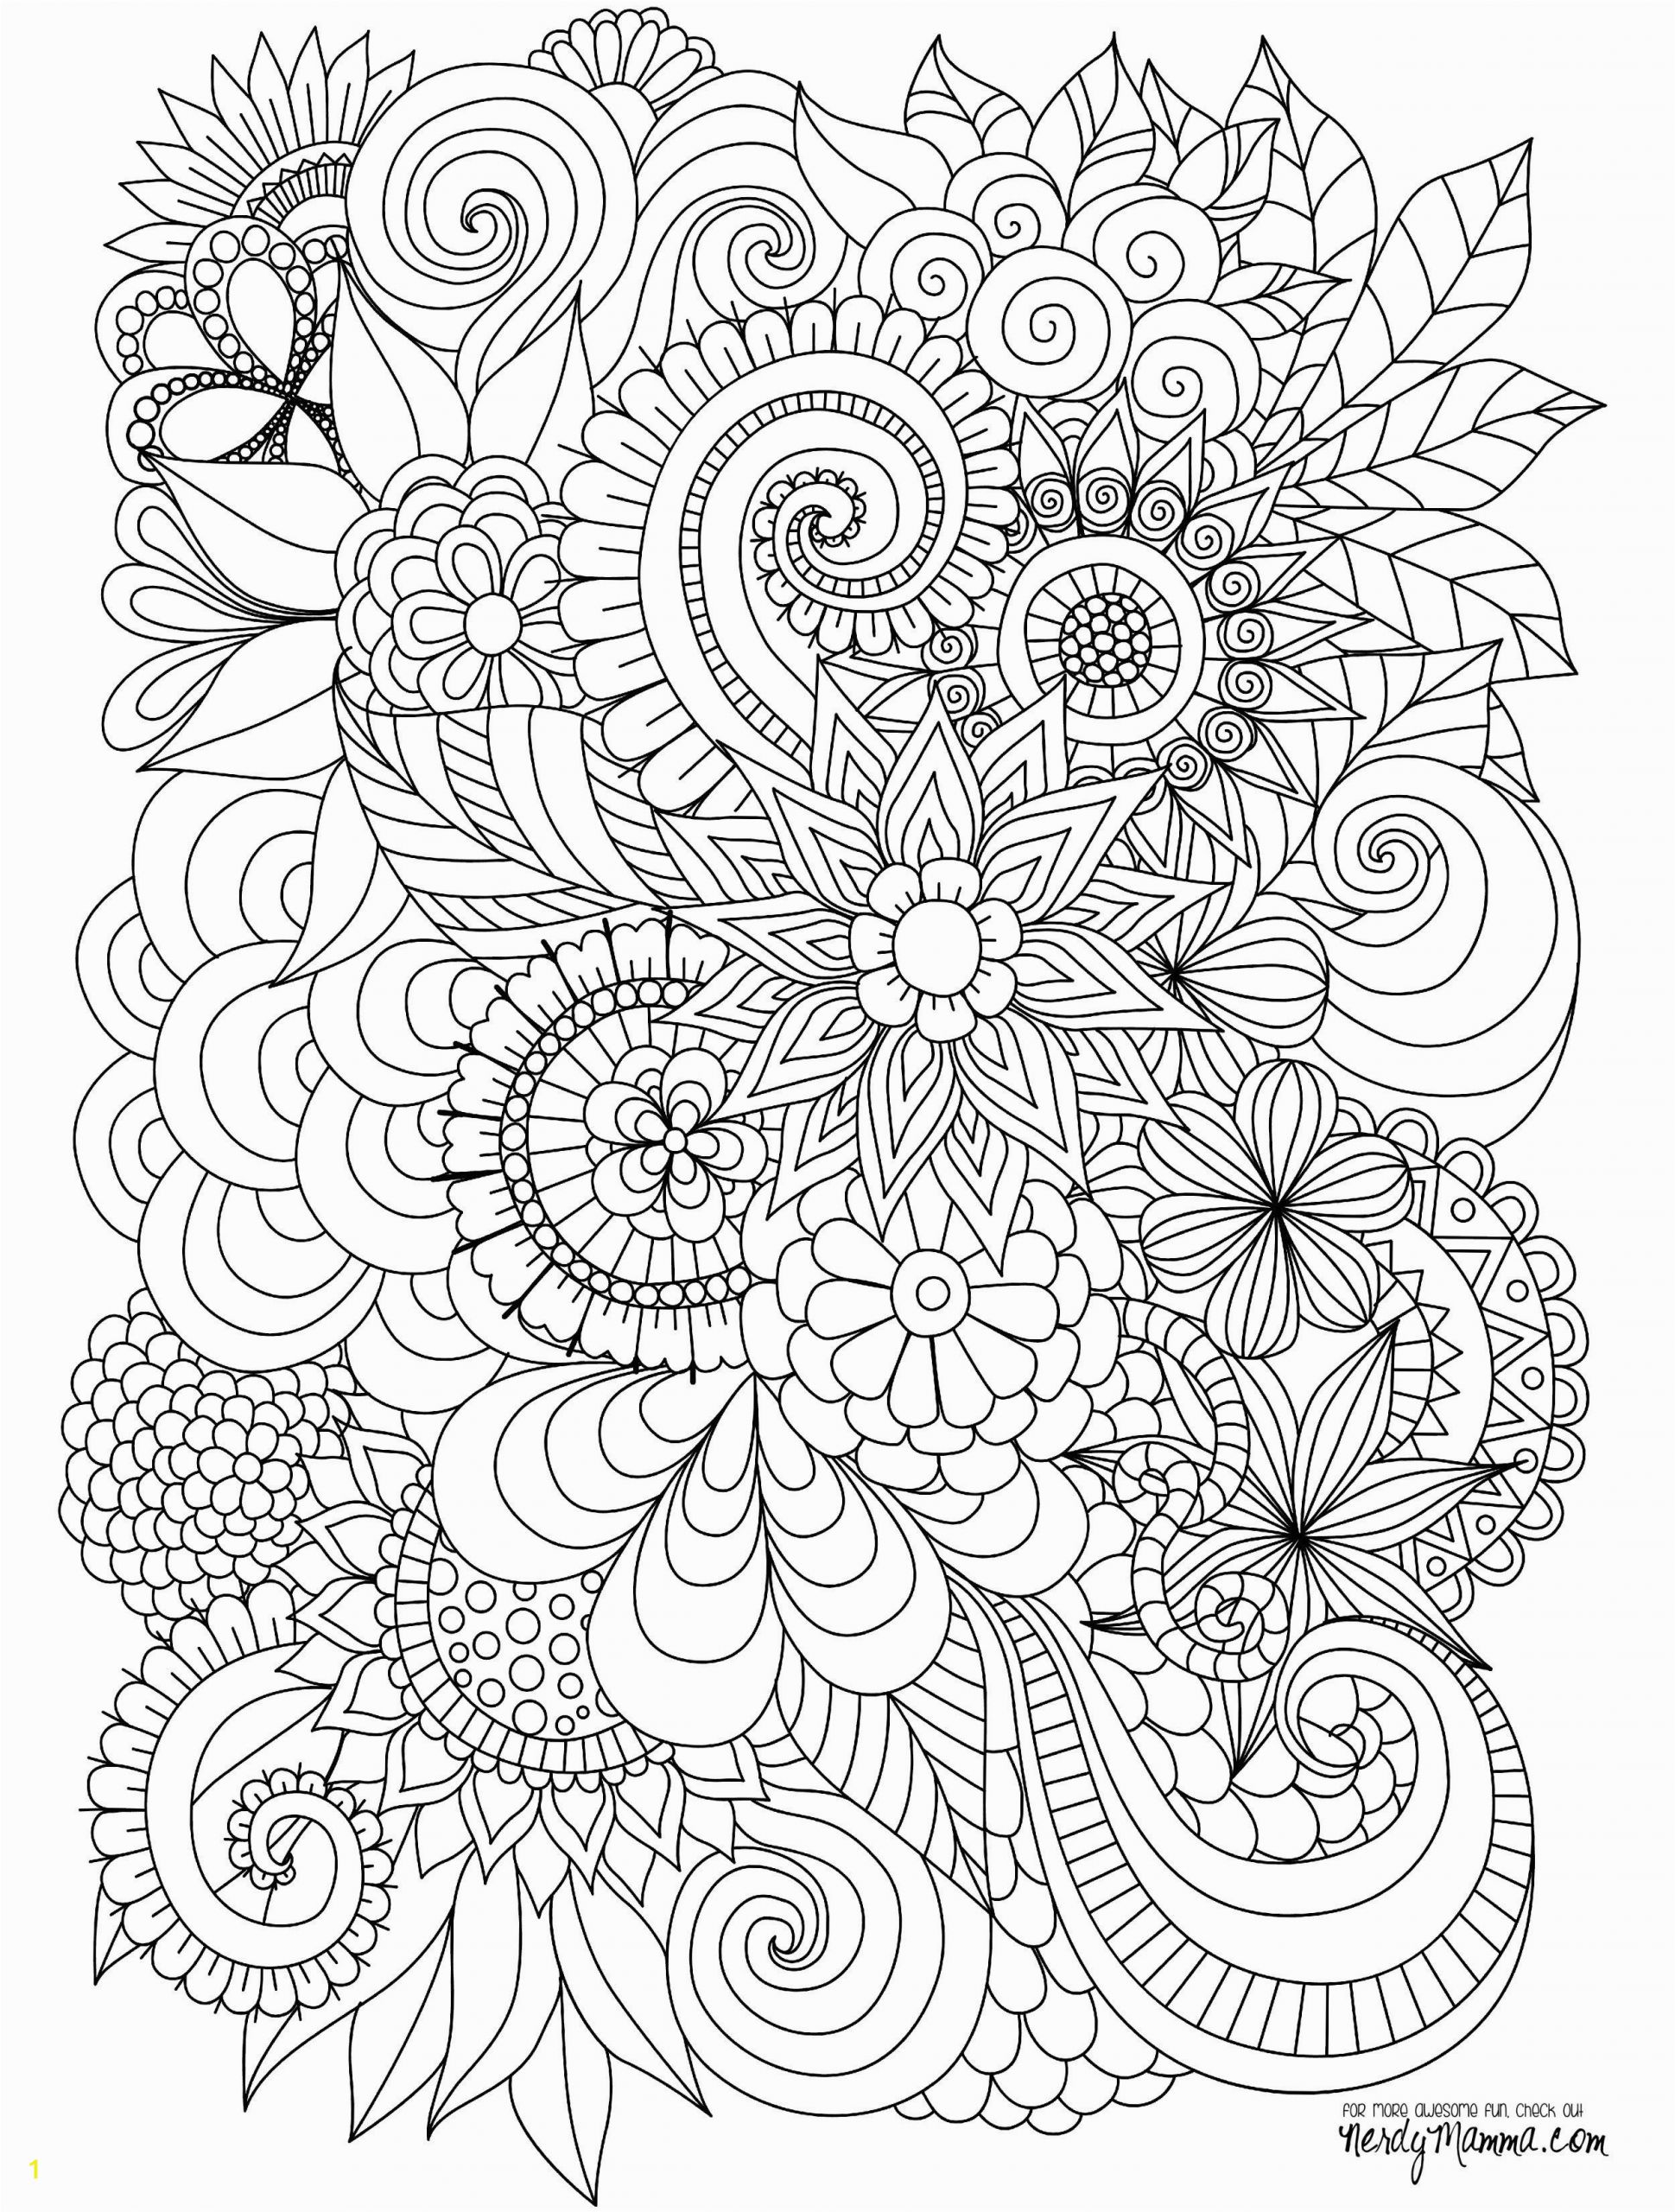 Coloring Pages for Adults Free 11 Free Printable Adult Coloring Pages